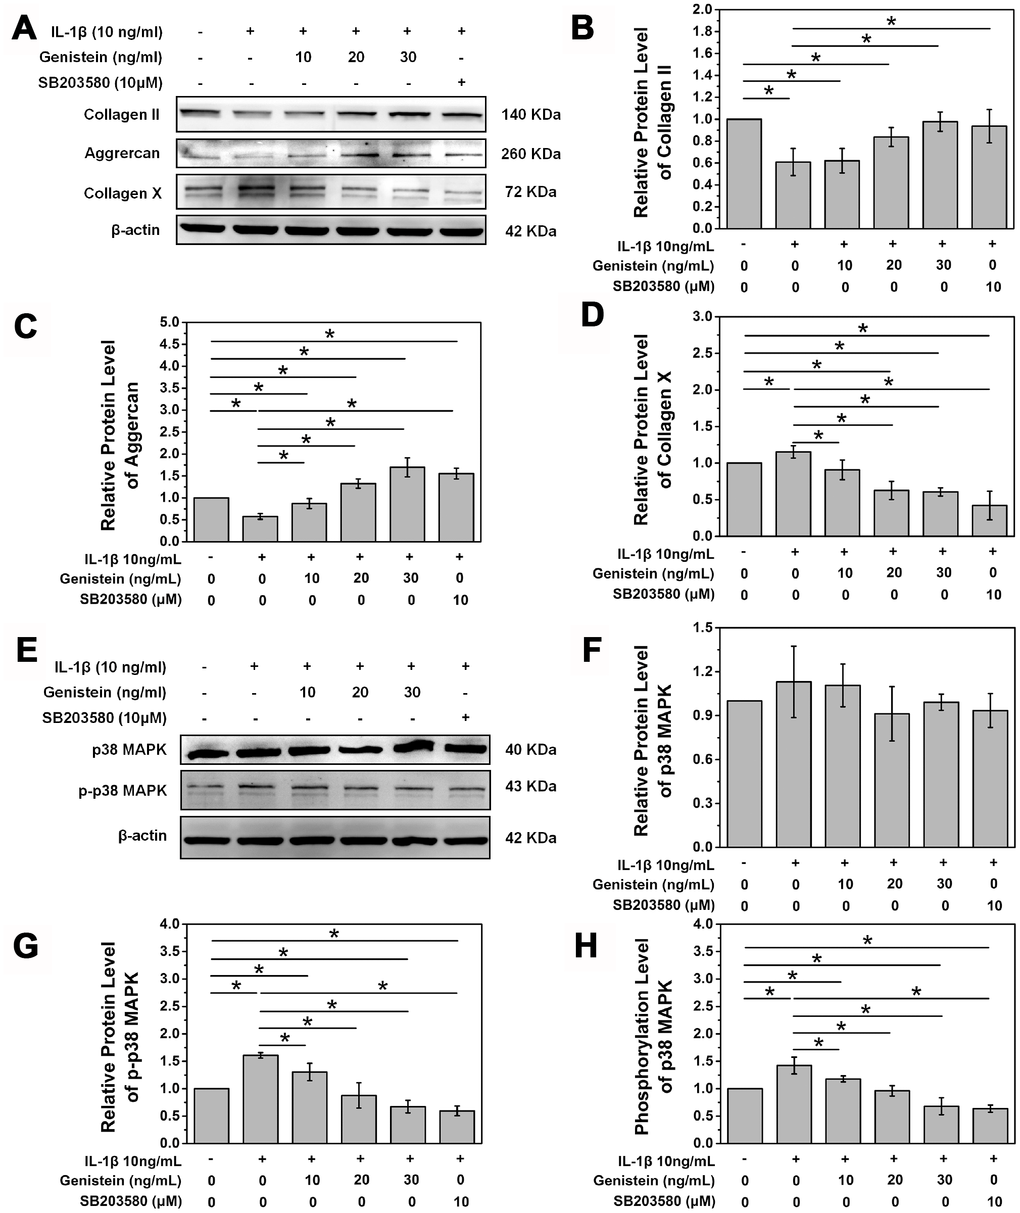 Genistein and p38 signal pathway inhibitor SB203580 attenuate the degeneration of NPCs and inhibit the phosphorylation of p38. (A) Protein expression of COL2A, aggrecan, and collagen X in NPCs treated with Genistein or SB203580. (B) Quantification of COL2A protein expression. *pC) Quantification of aggrecan protein expression. *pD) Quantification of collagen X protein expression. *pE) Protein expression of p38 and p-p38 in NPCs treated with Genistein or SB203580. (F) Quantification of p38 MAPK protein expression. *pG) Quantification of p-p38 MAPK protein expression. *p